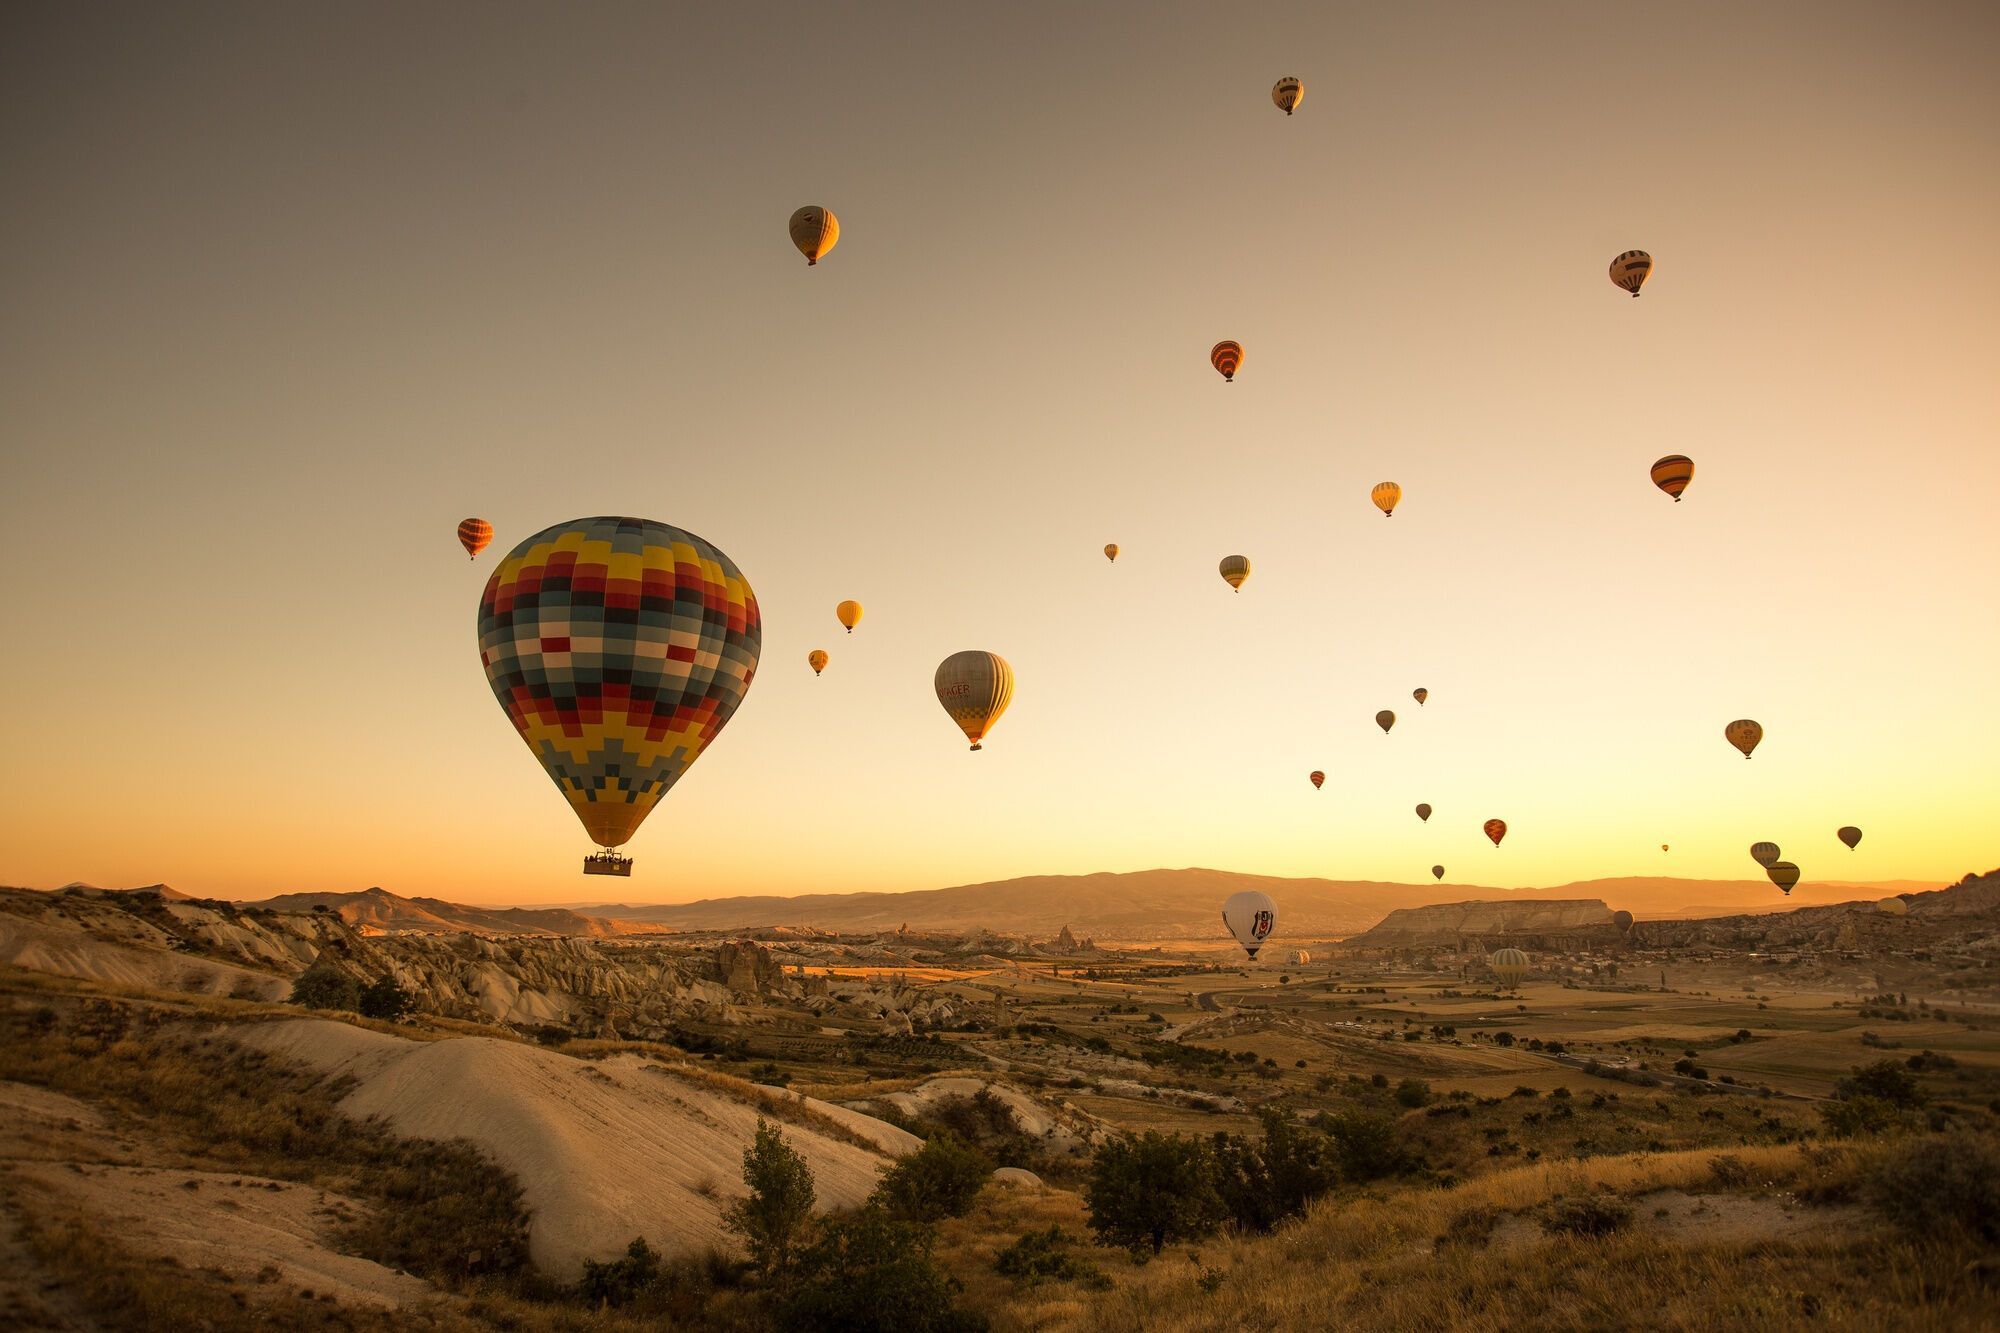 Beautiful yet dangerous: what risks can occur during a hot air balloon flight